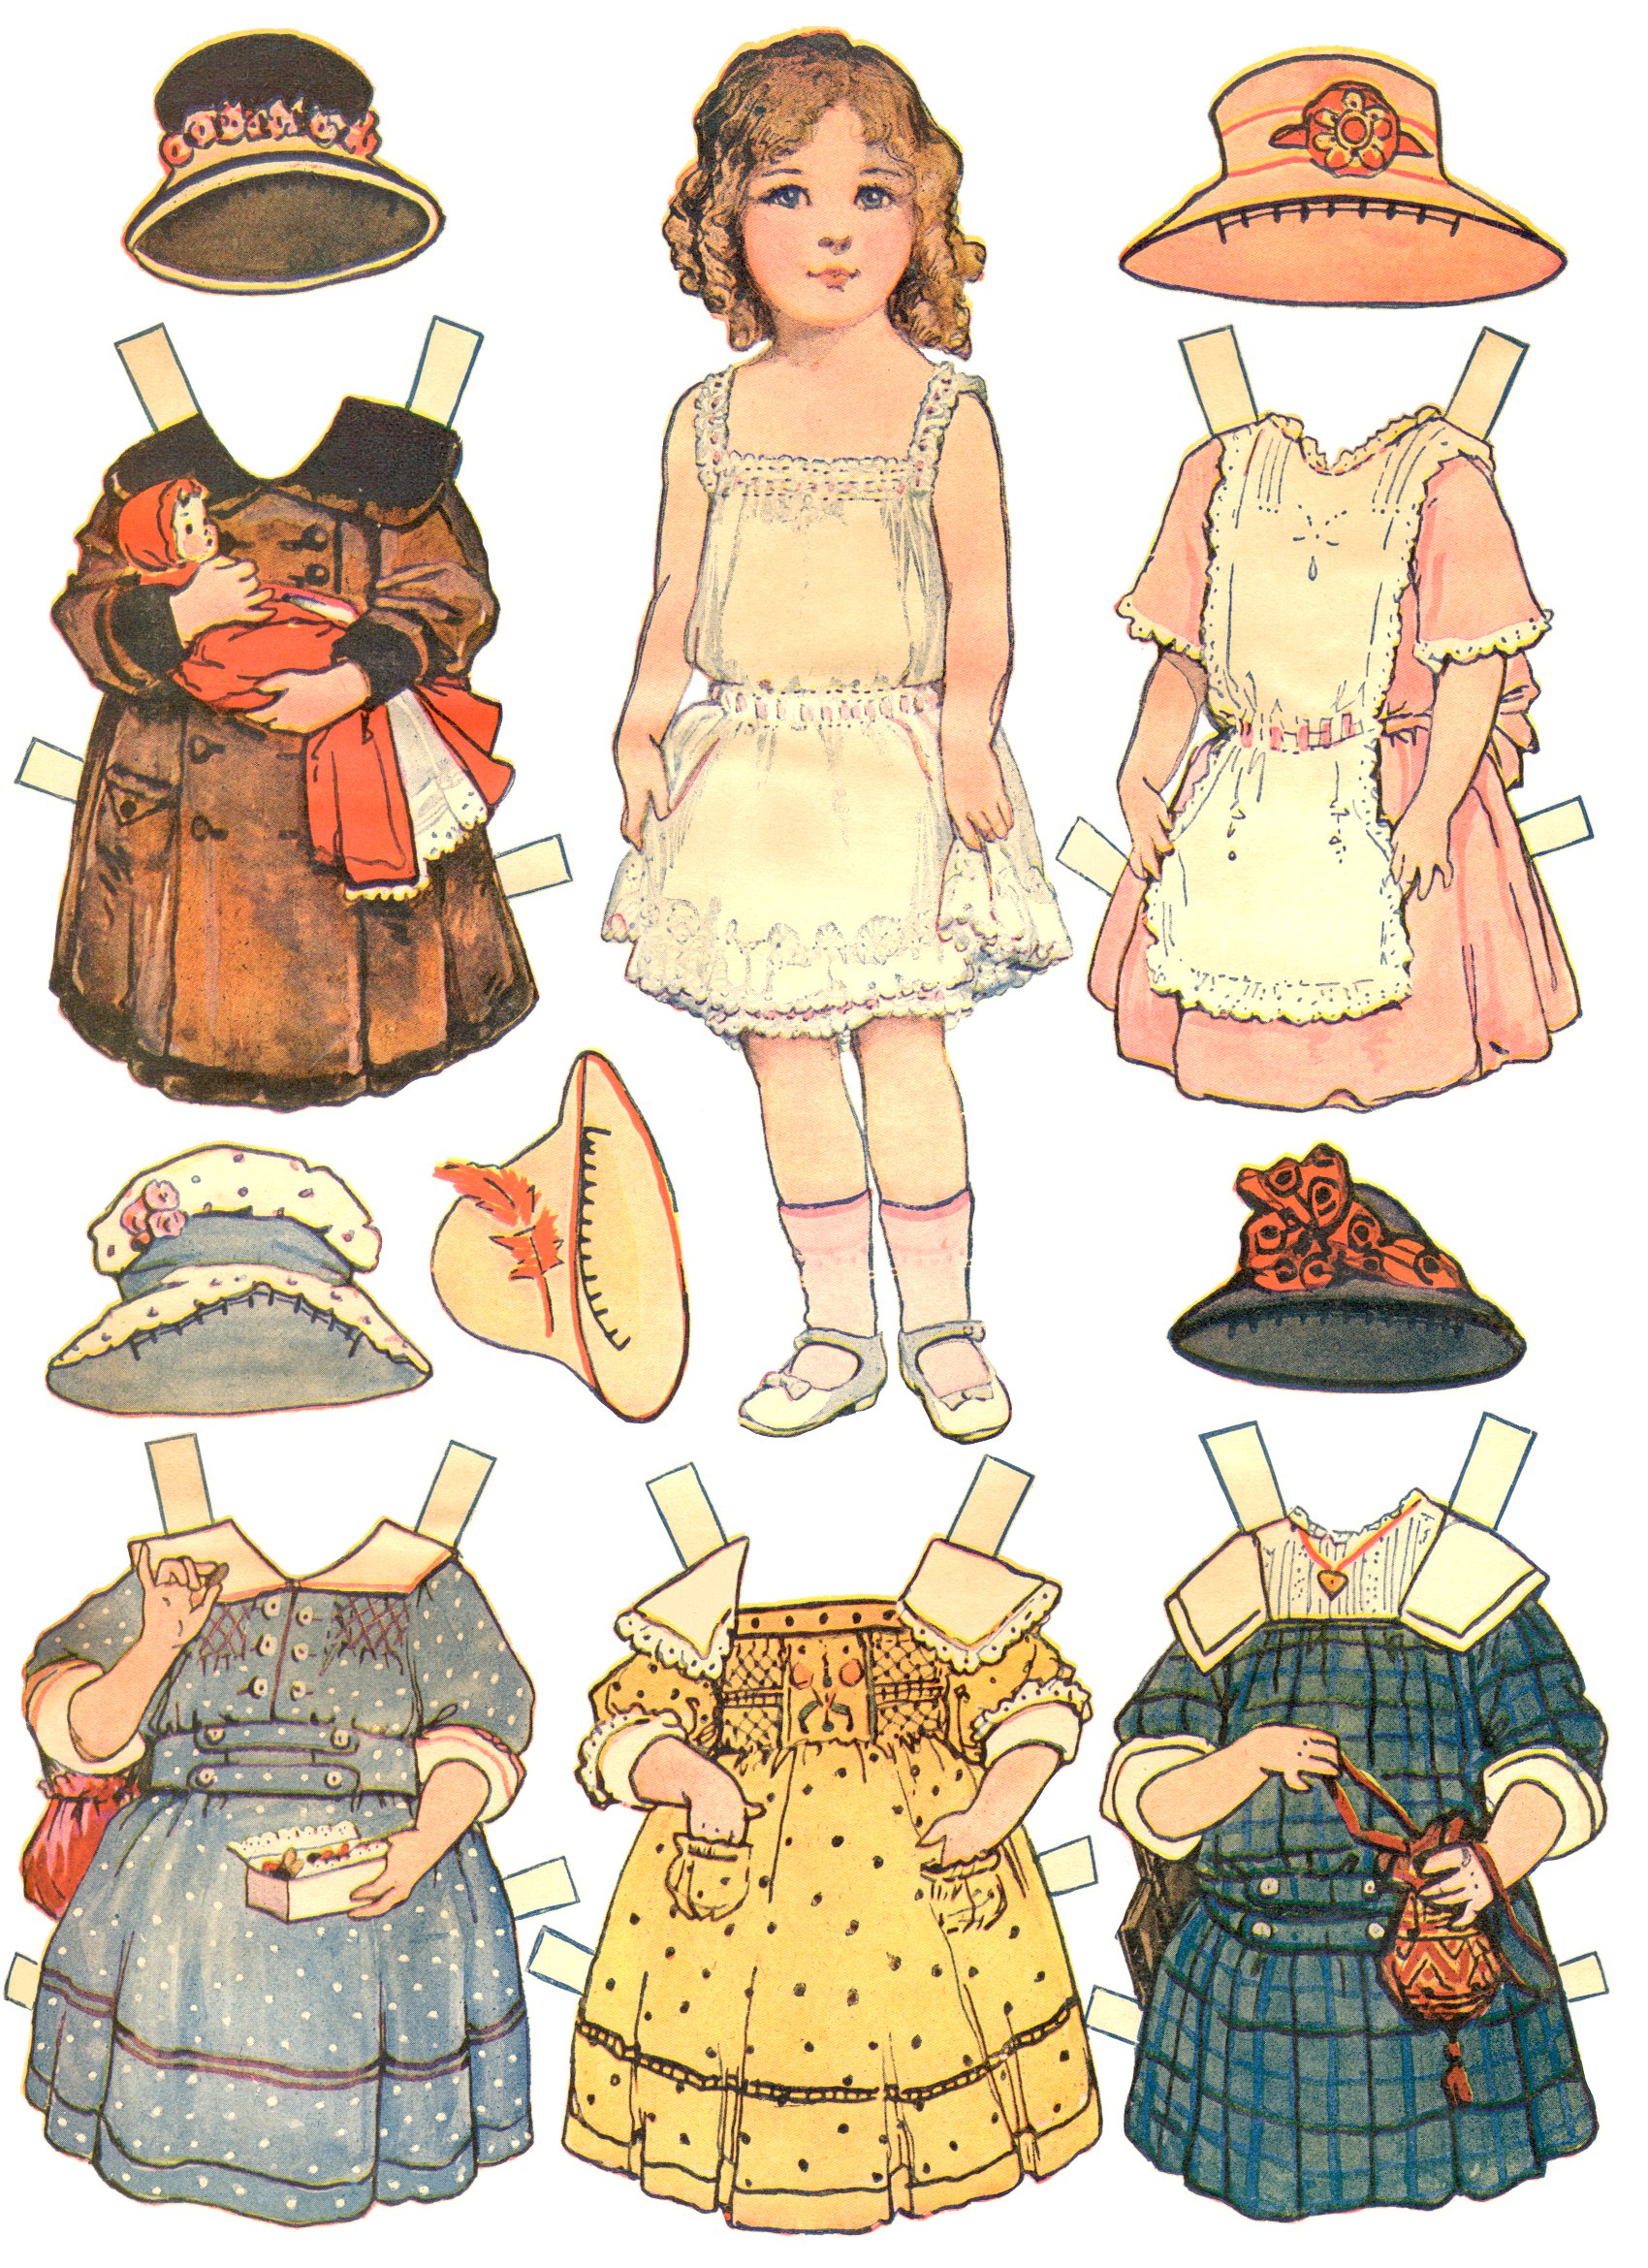 8-best-images-of-family-paper-dolls-printable-family-paper-dolls